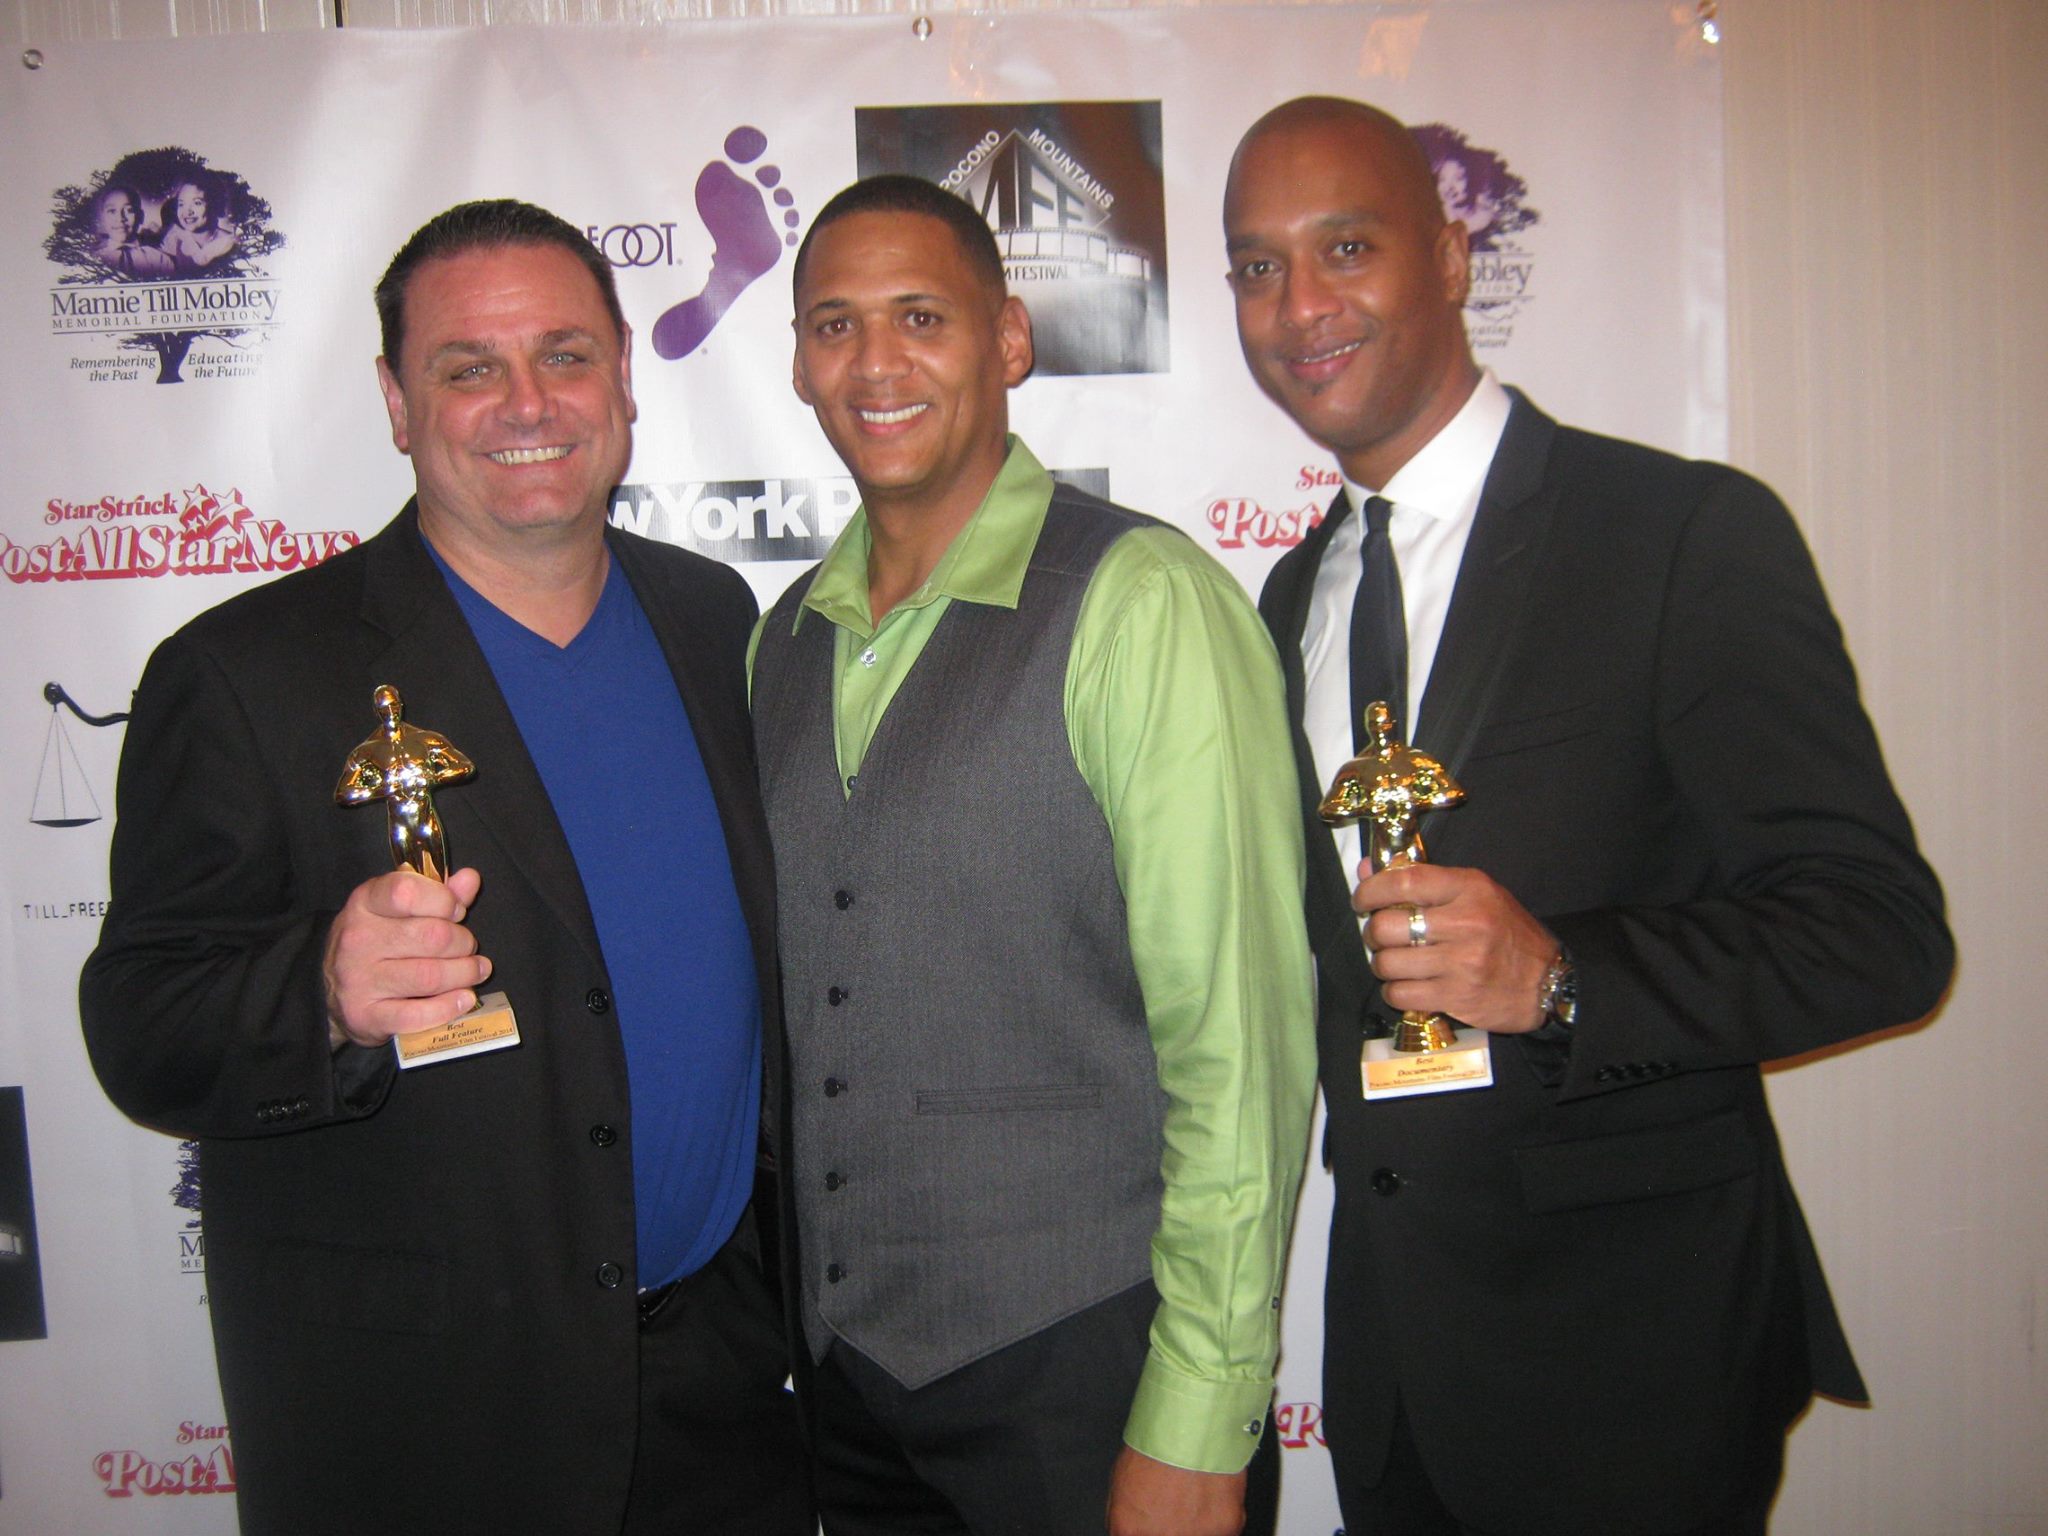 With award winning Writer Kevin Davis from Feature Film 